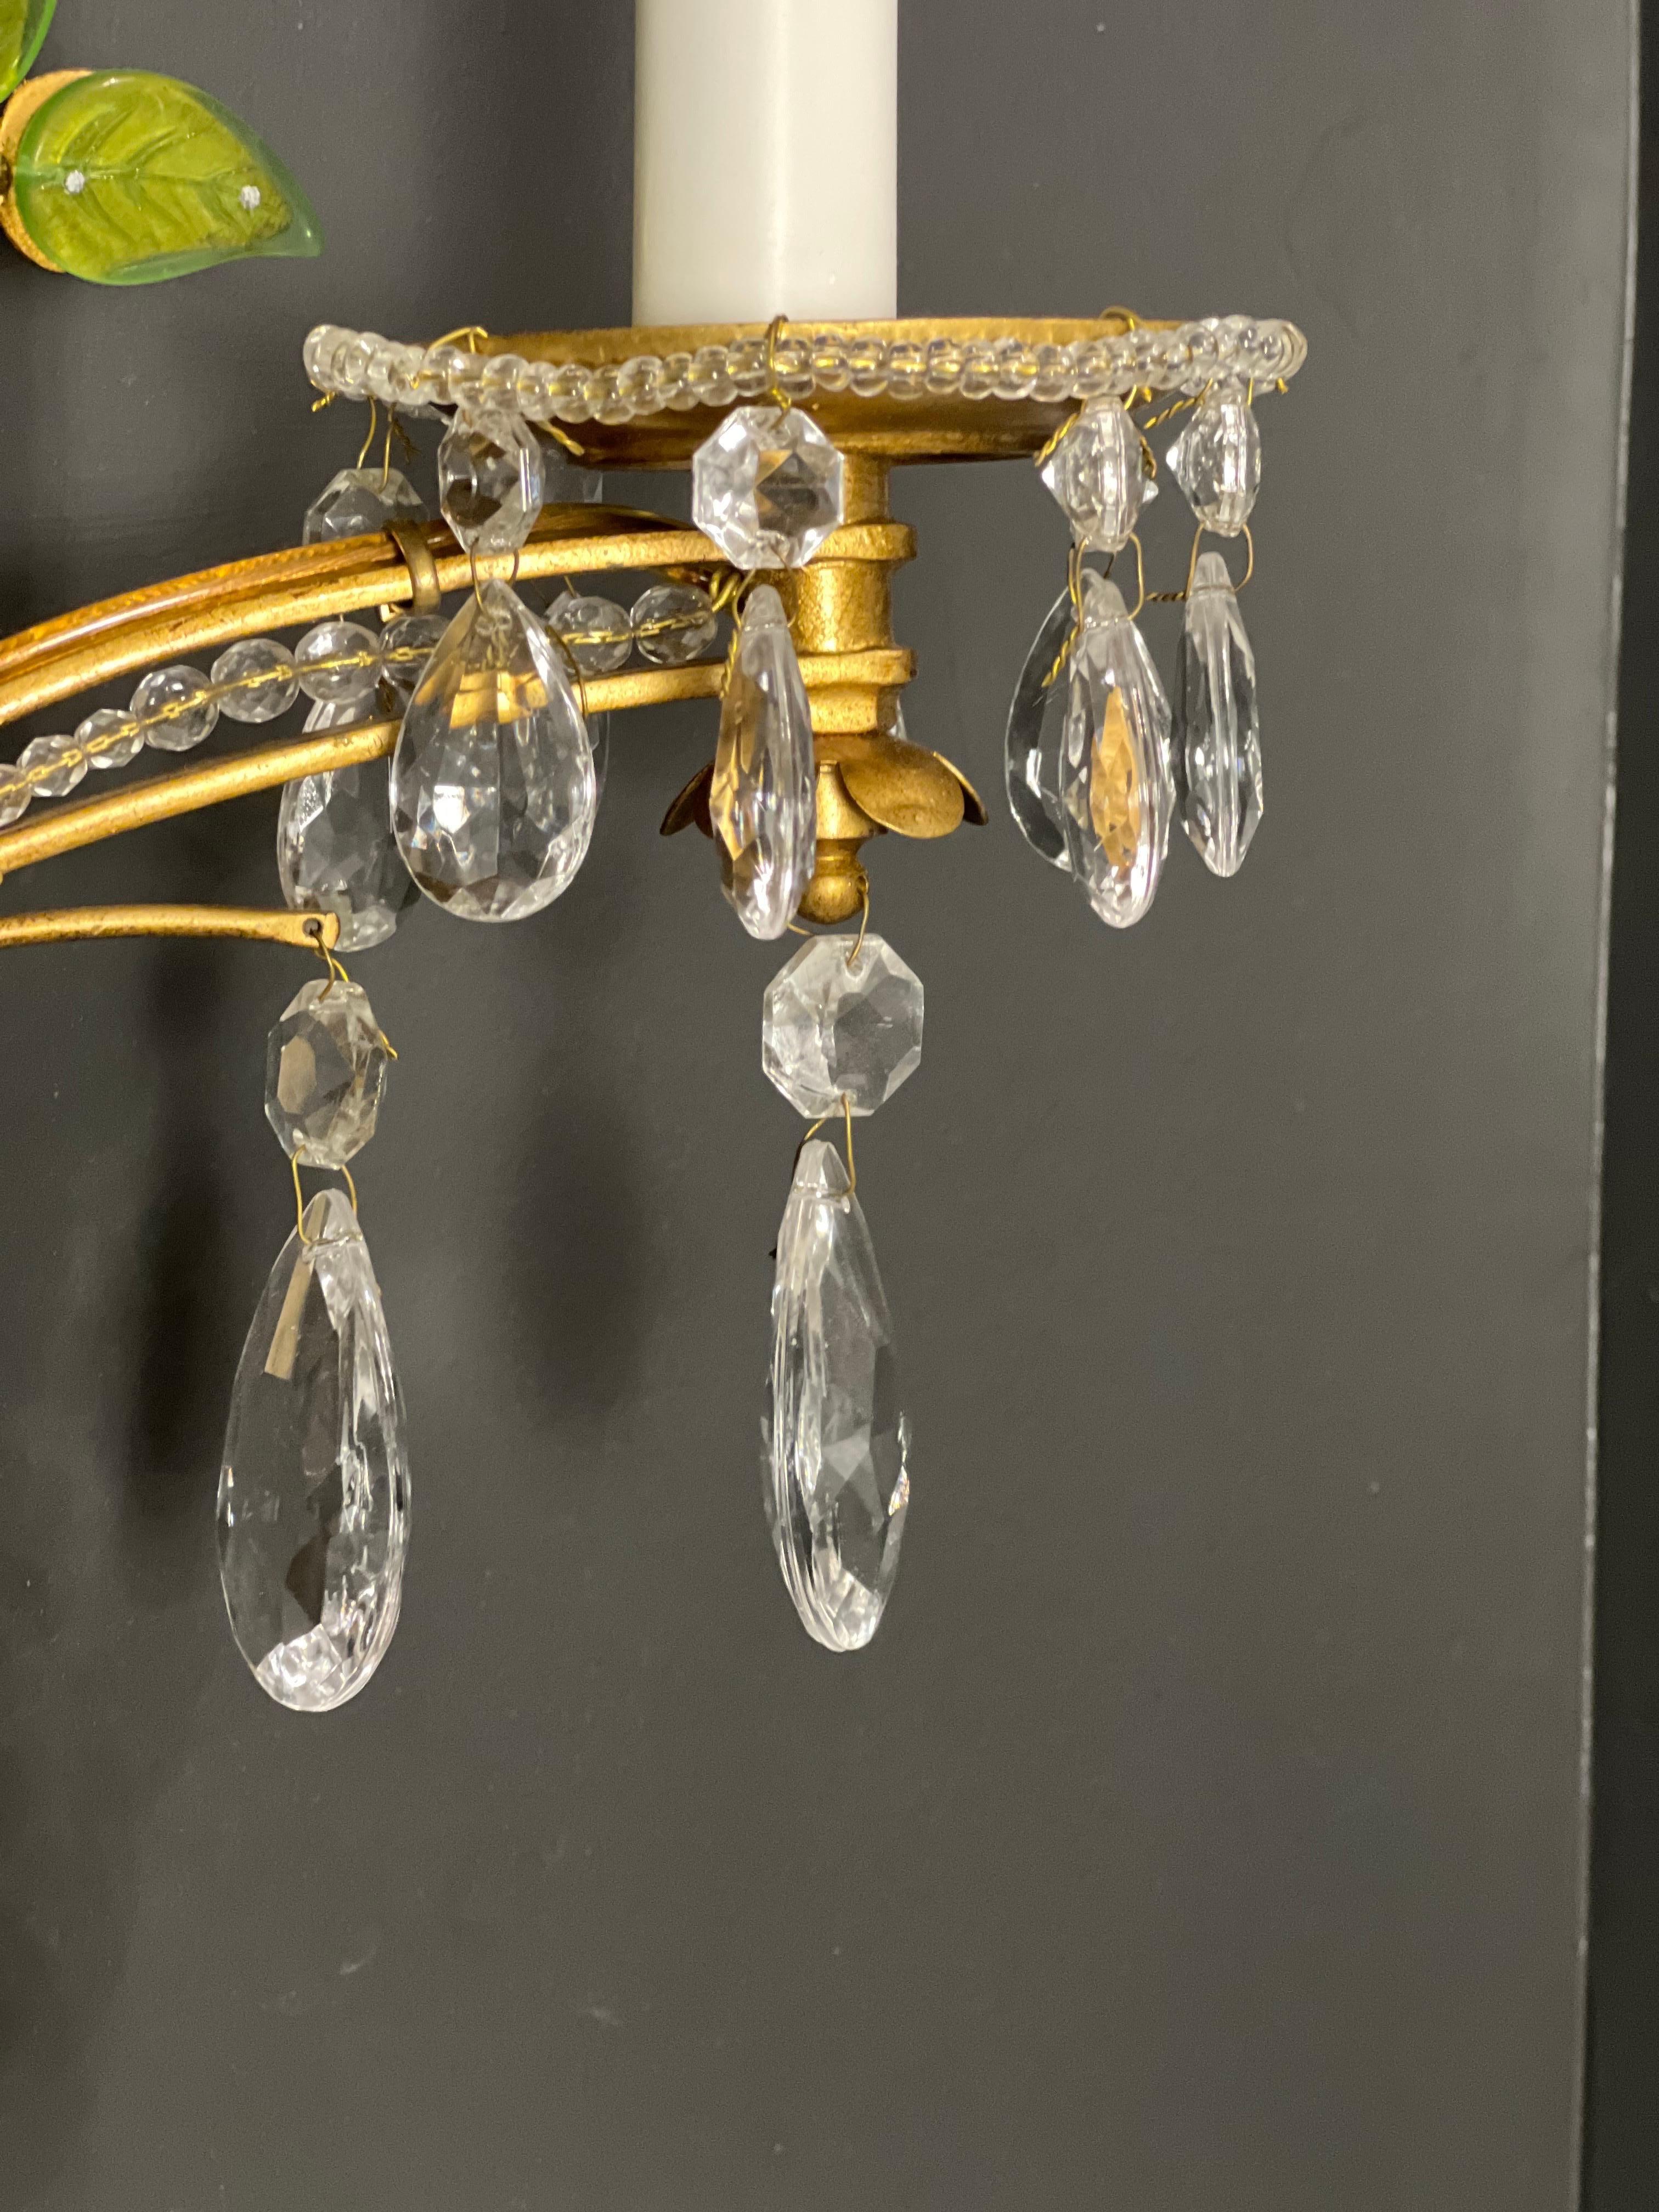 Contemporary Italian Iron Sconces with Crystal Flowers and Beading, Pair For Sale